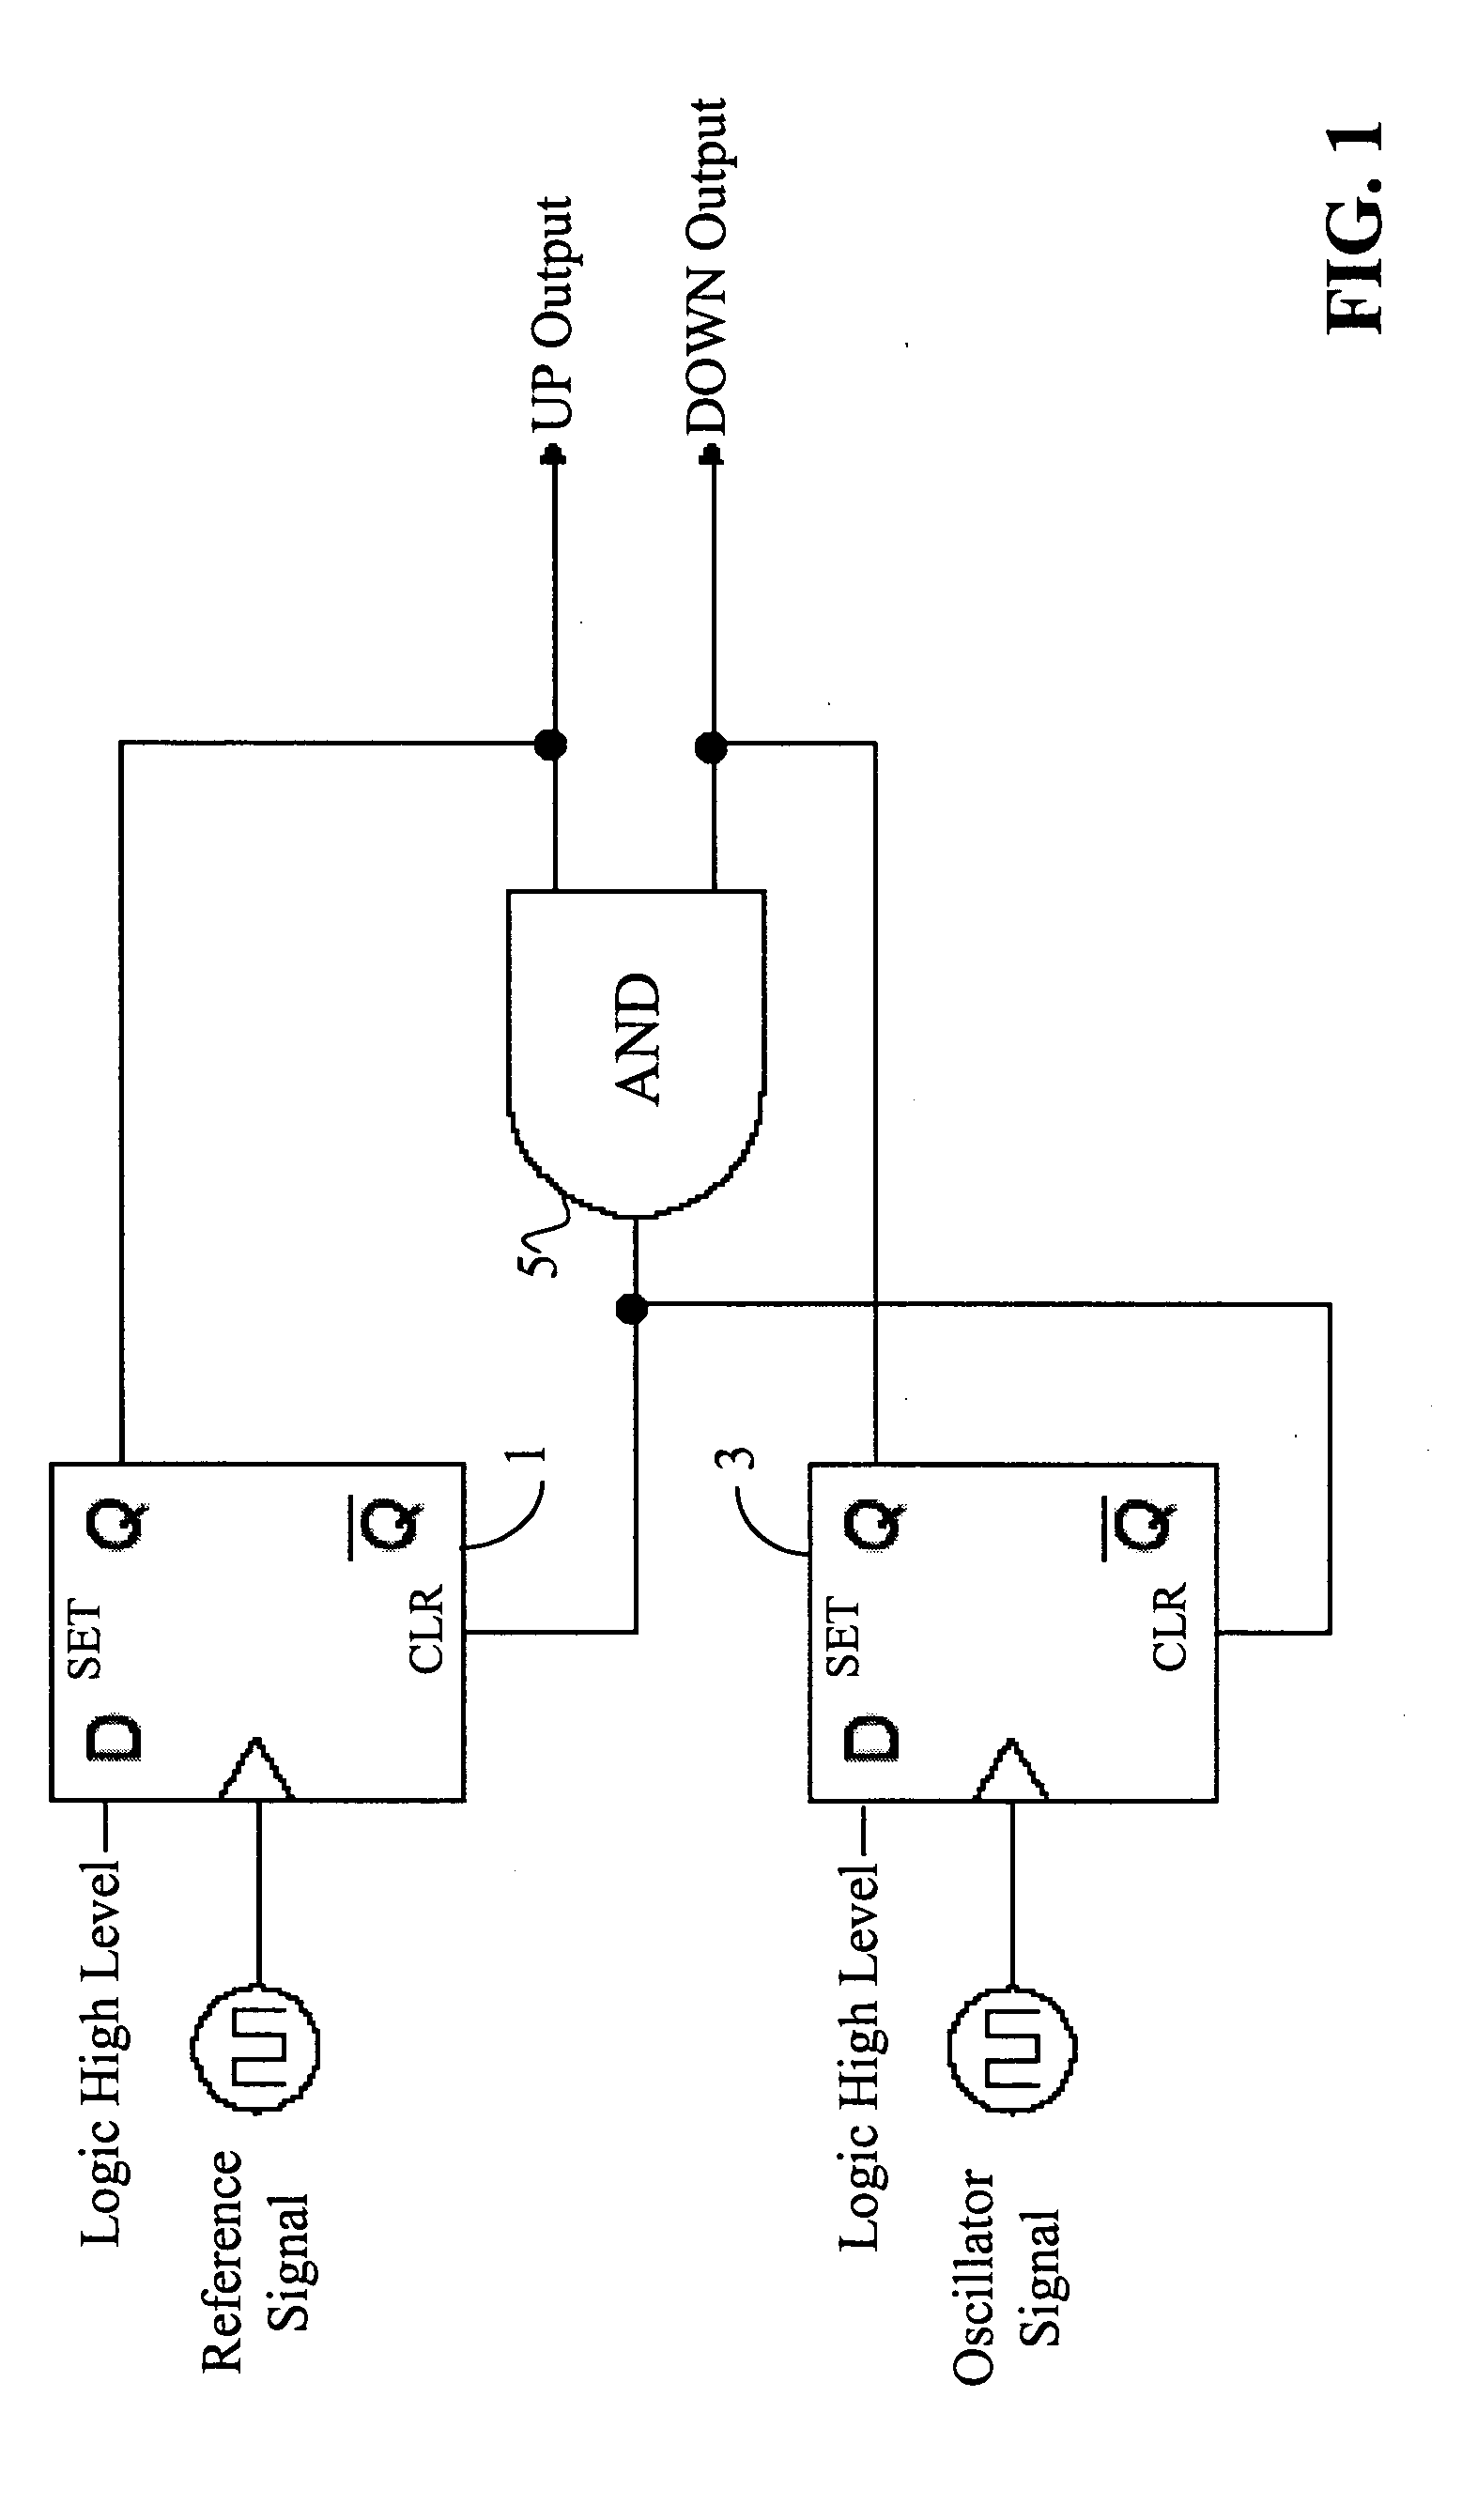 Multi-function differential logic gate